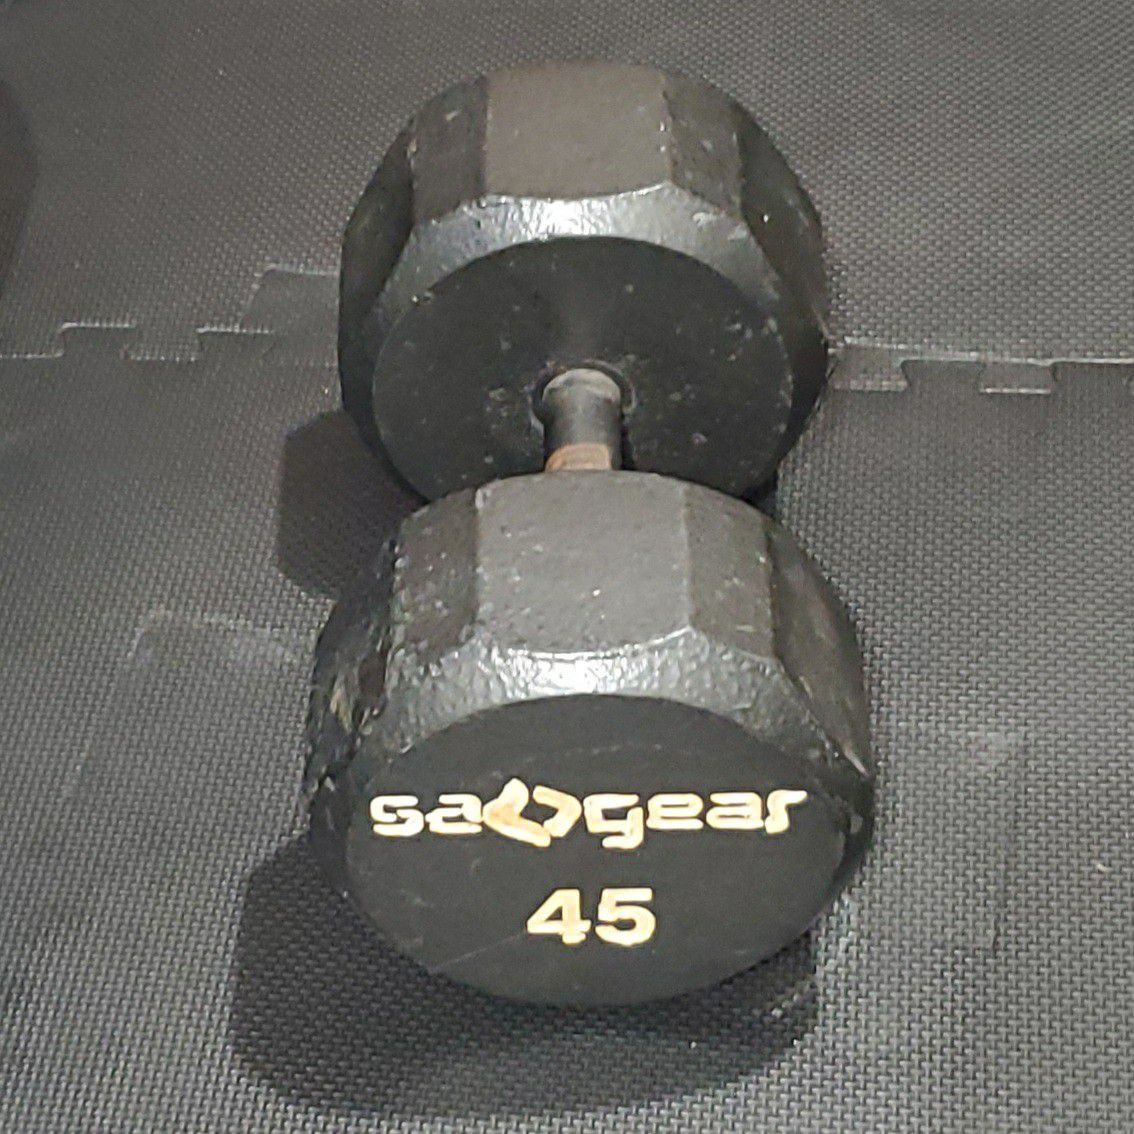 Single dumbbells, 45 pounds, pick up only.